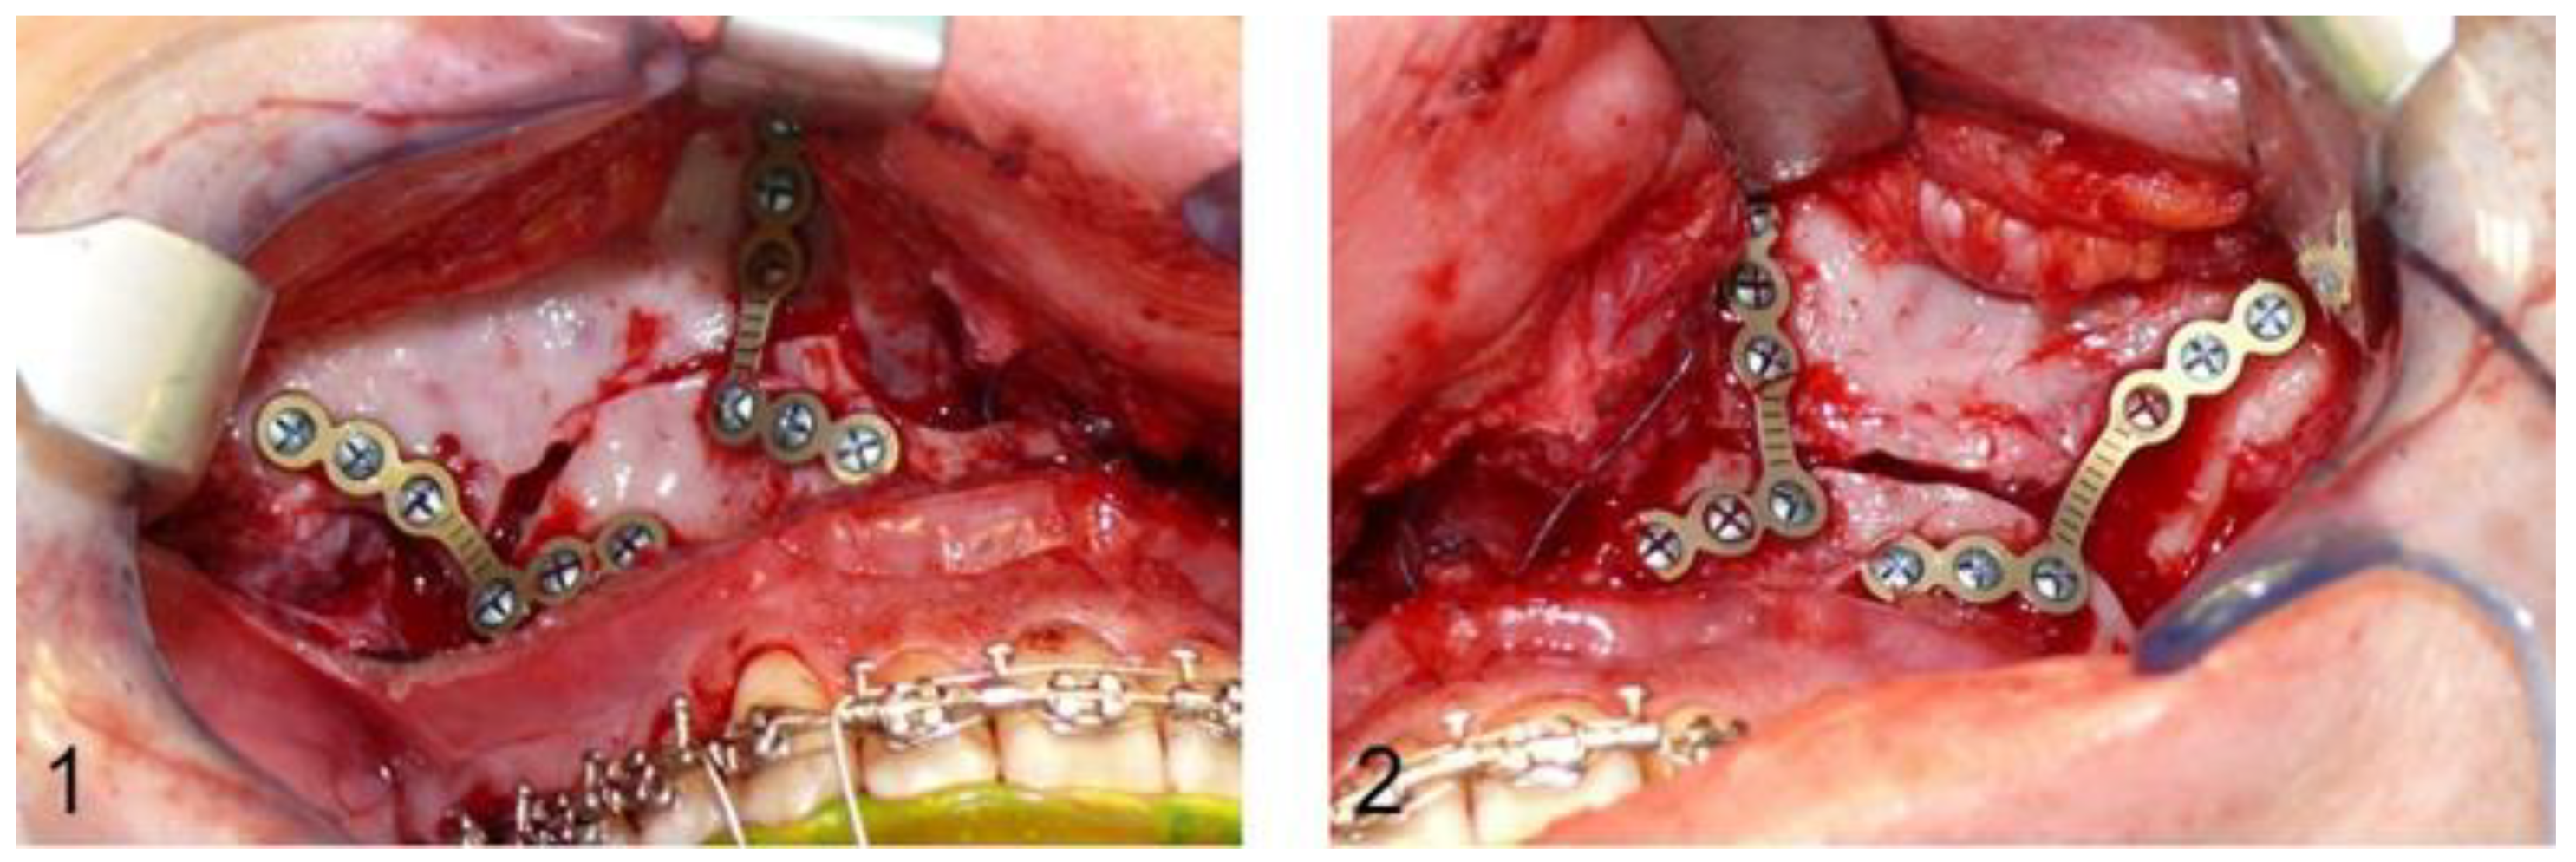 JPM | Free Full-Text | Dental Root Injuries Caused by Osteosynthesis Screws  in Orthognathic Surgery&mdash;Comparison of Conventional Osteosynthesis and  Osteosynthesis by CAD/CAM Drill Guides and Patient-Specific Implants